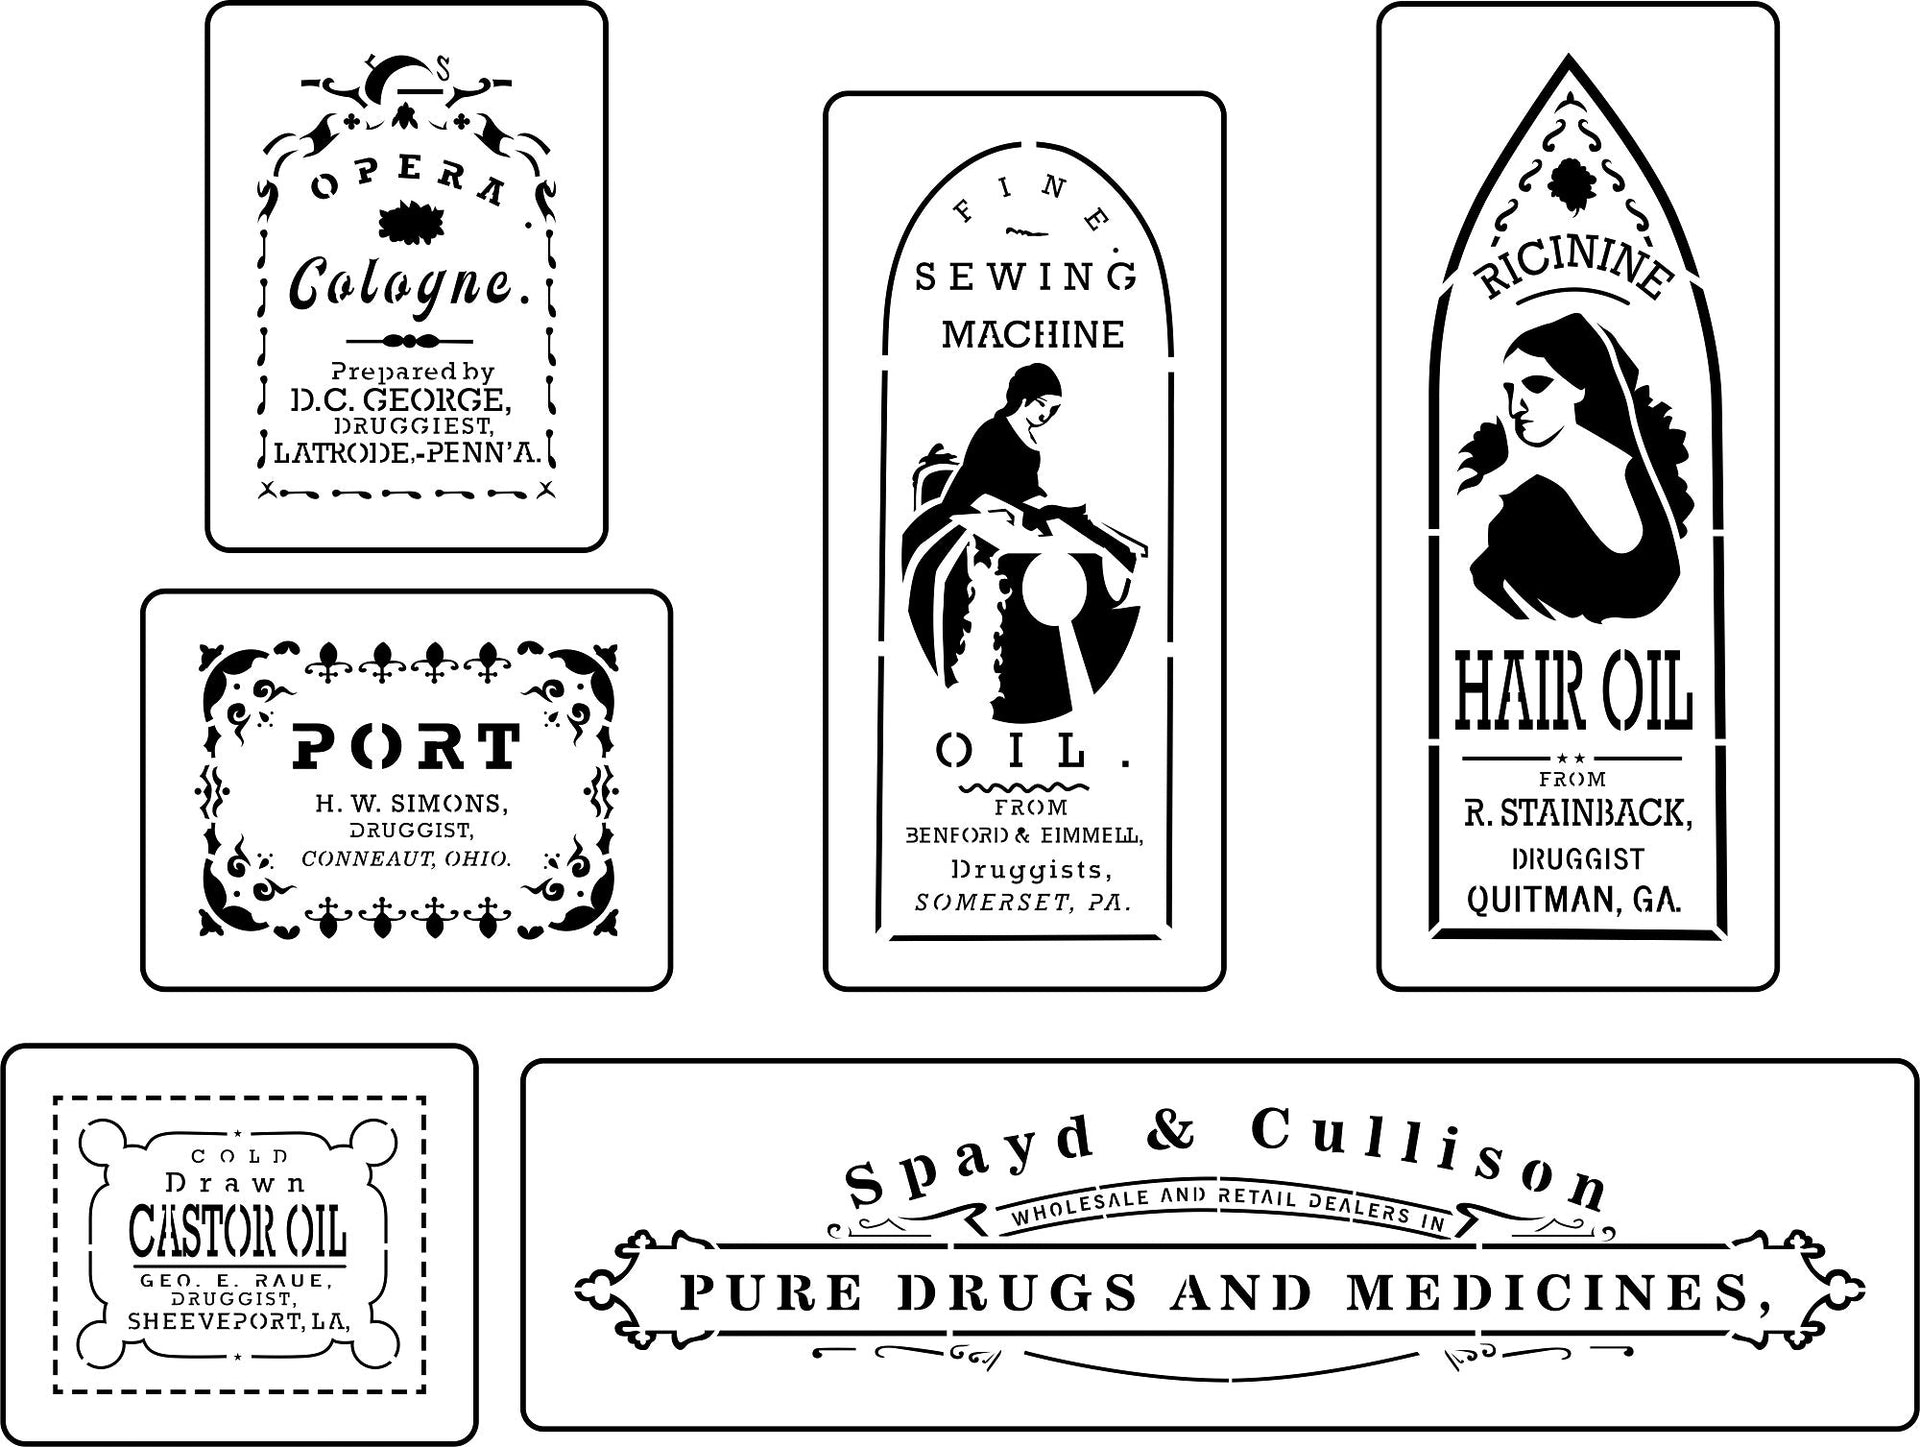 apothecary labels template